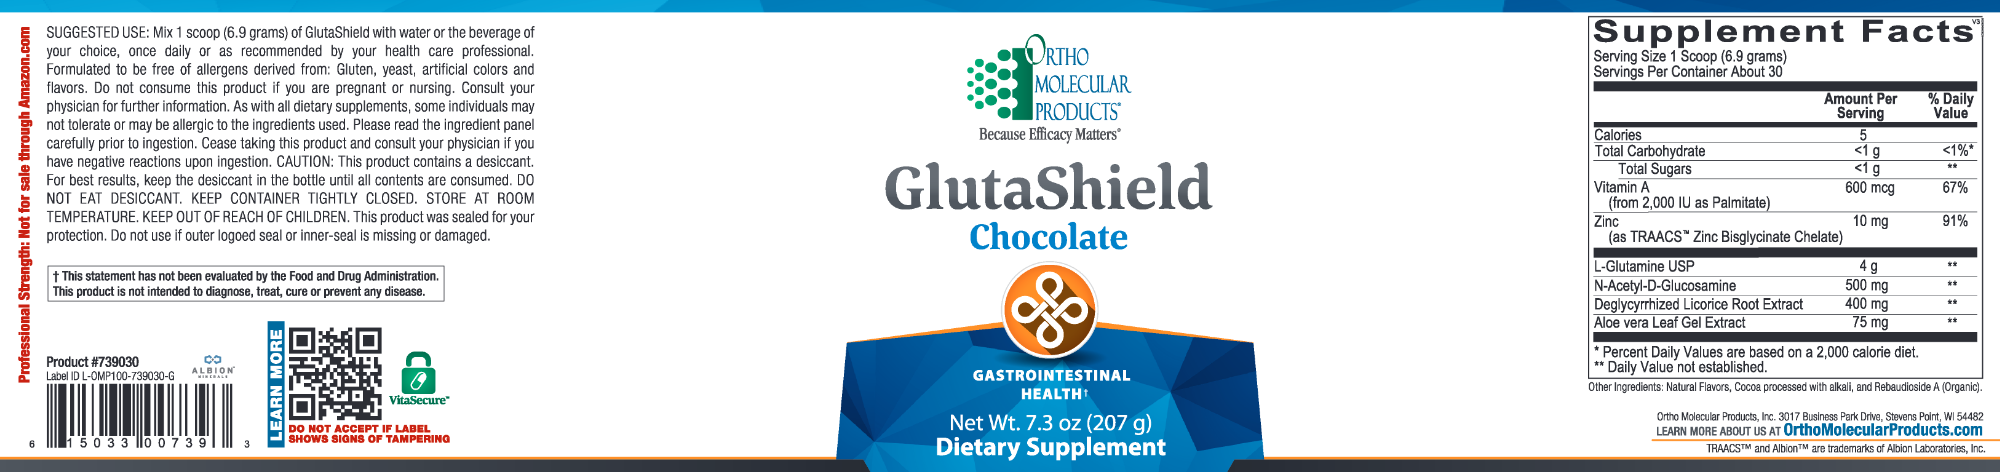 GlutaShield-Vitamins & Supplements-Ortho Molecular Products-Chocolate-Pine Street Clinic